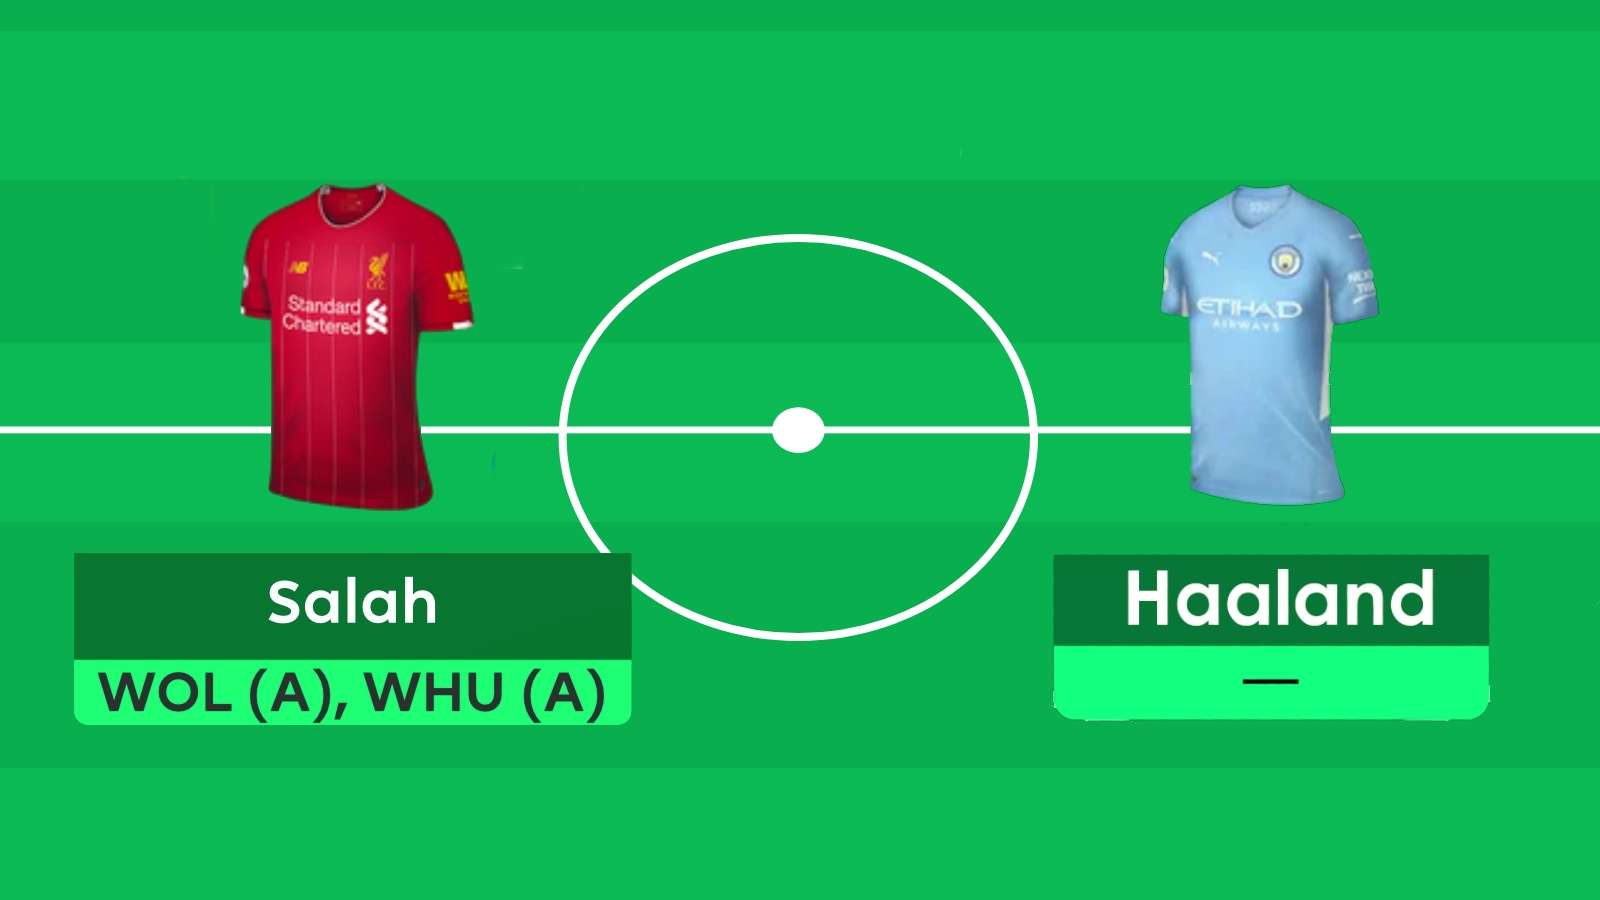 Salah and Haaland in FPL with blank and double gameweeks